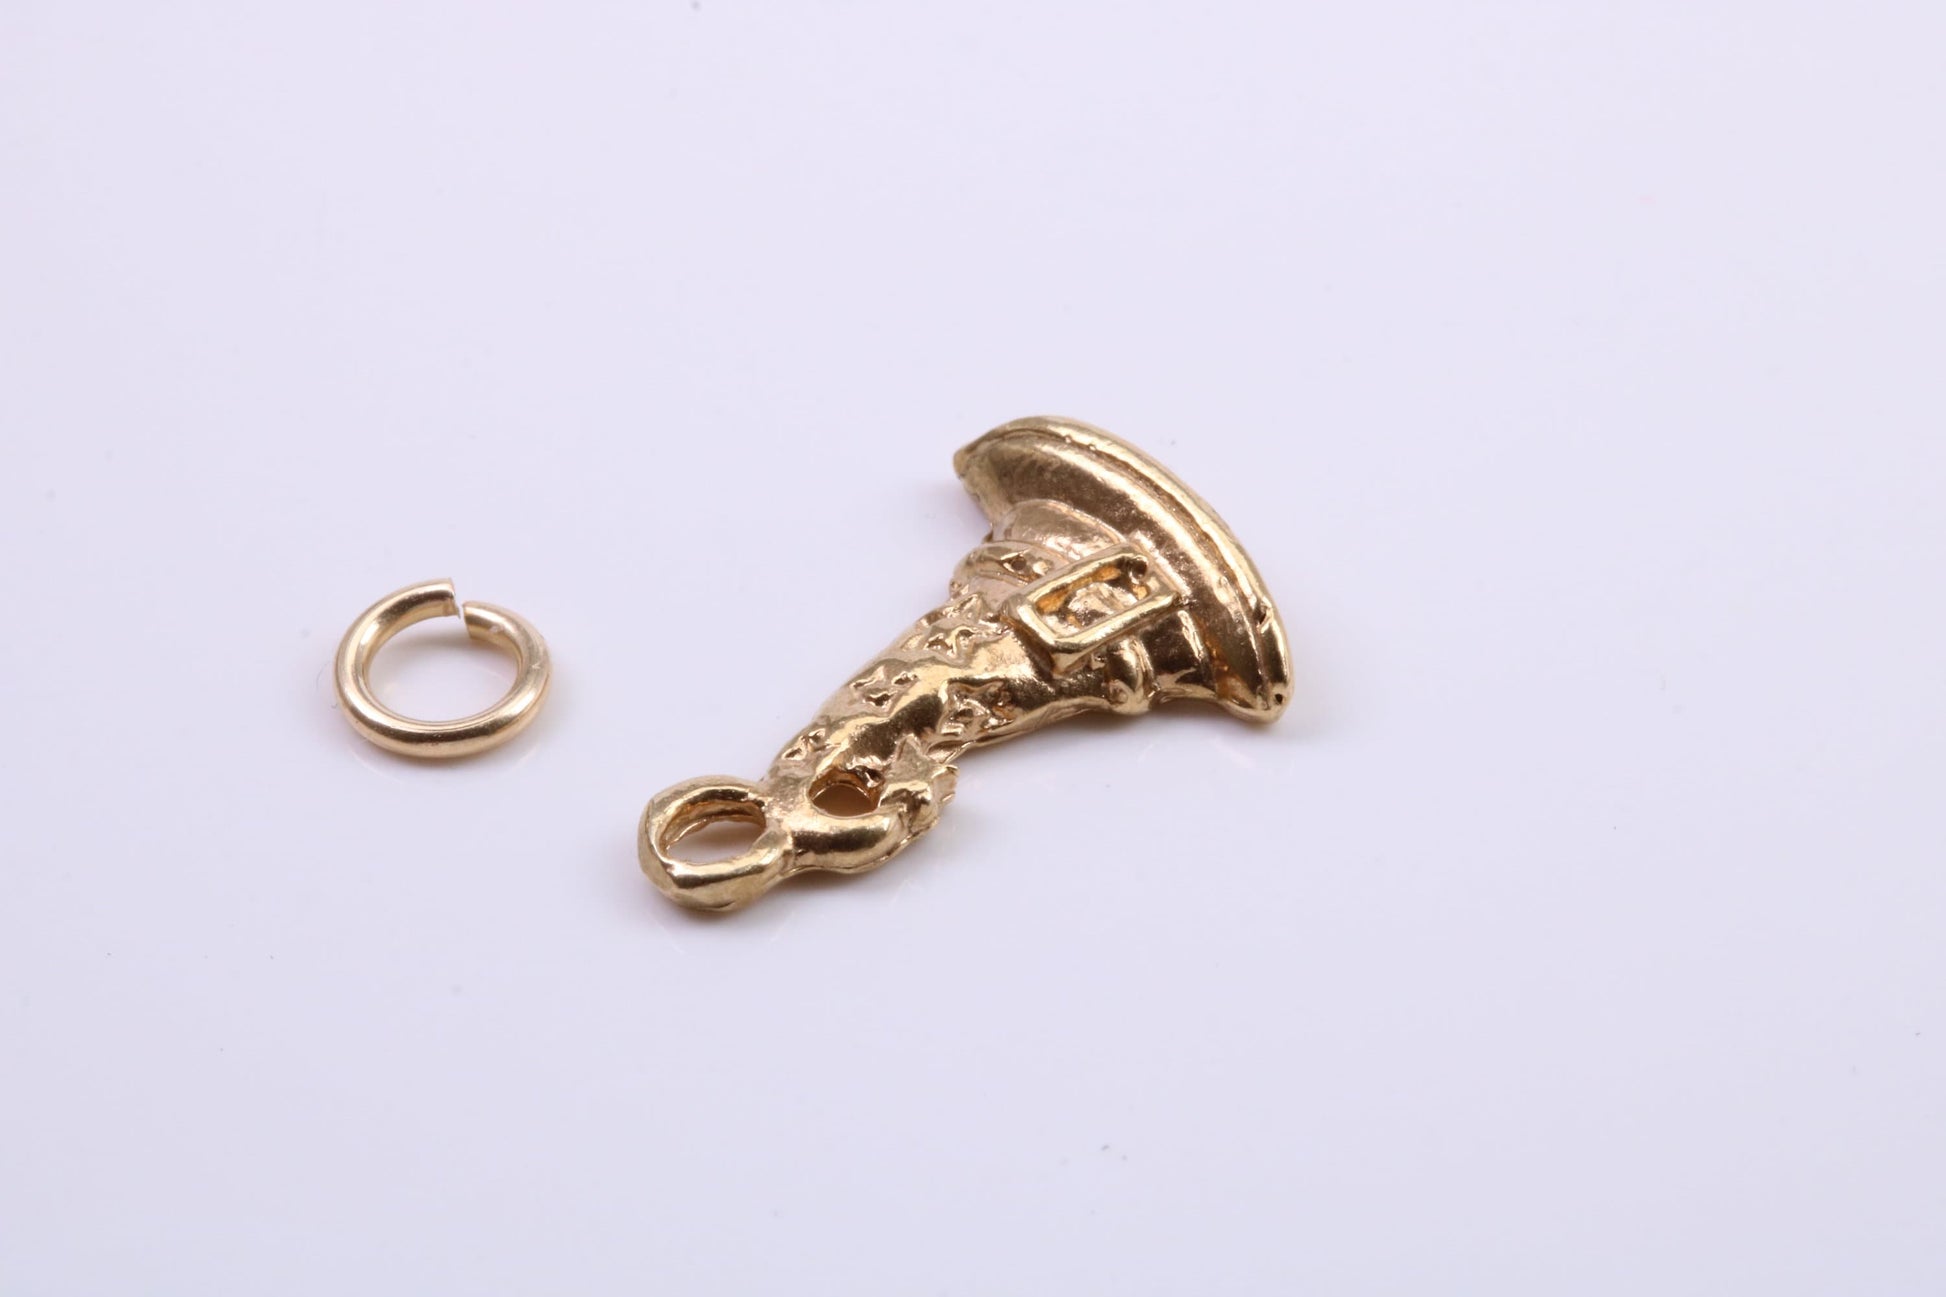 Wizards Hat Charm, Traditional Charm, Made from Solid 9ct Yellow Gold, British Hallmarked, Complete with Attachment Link